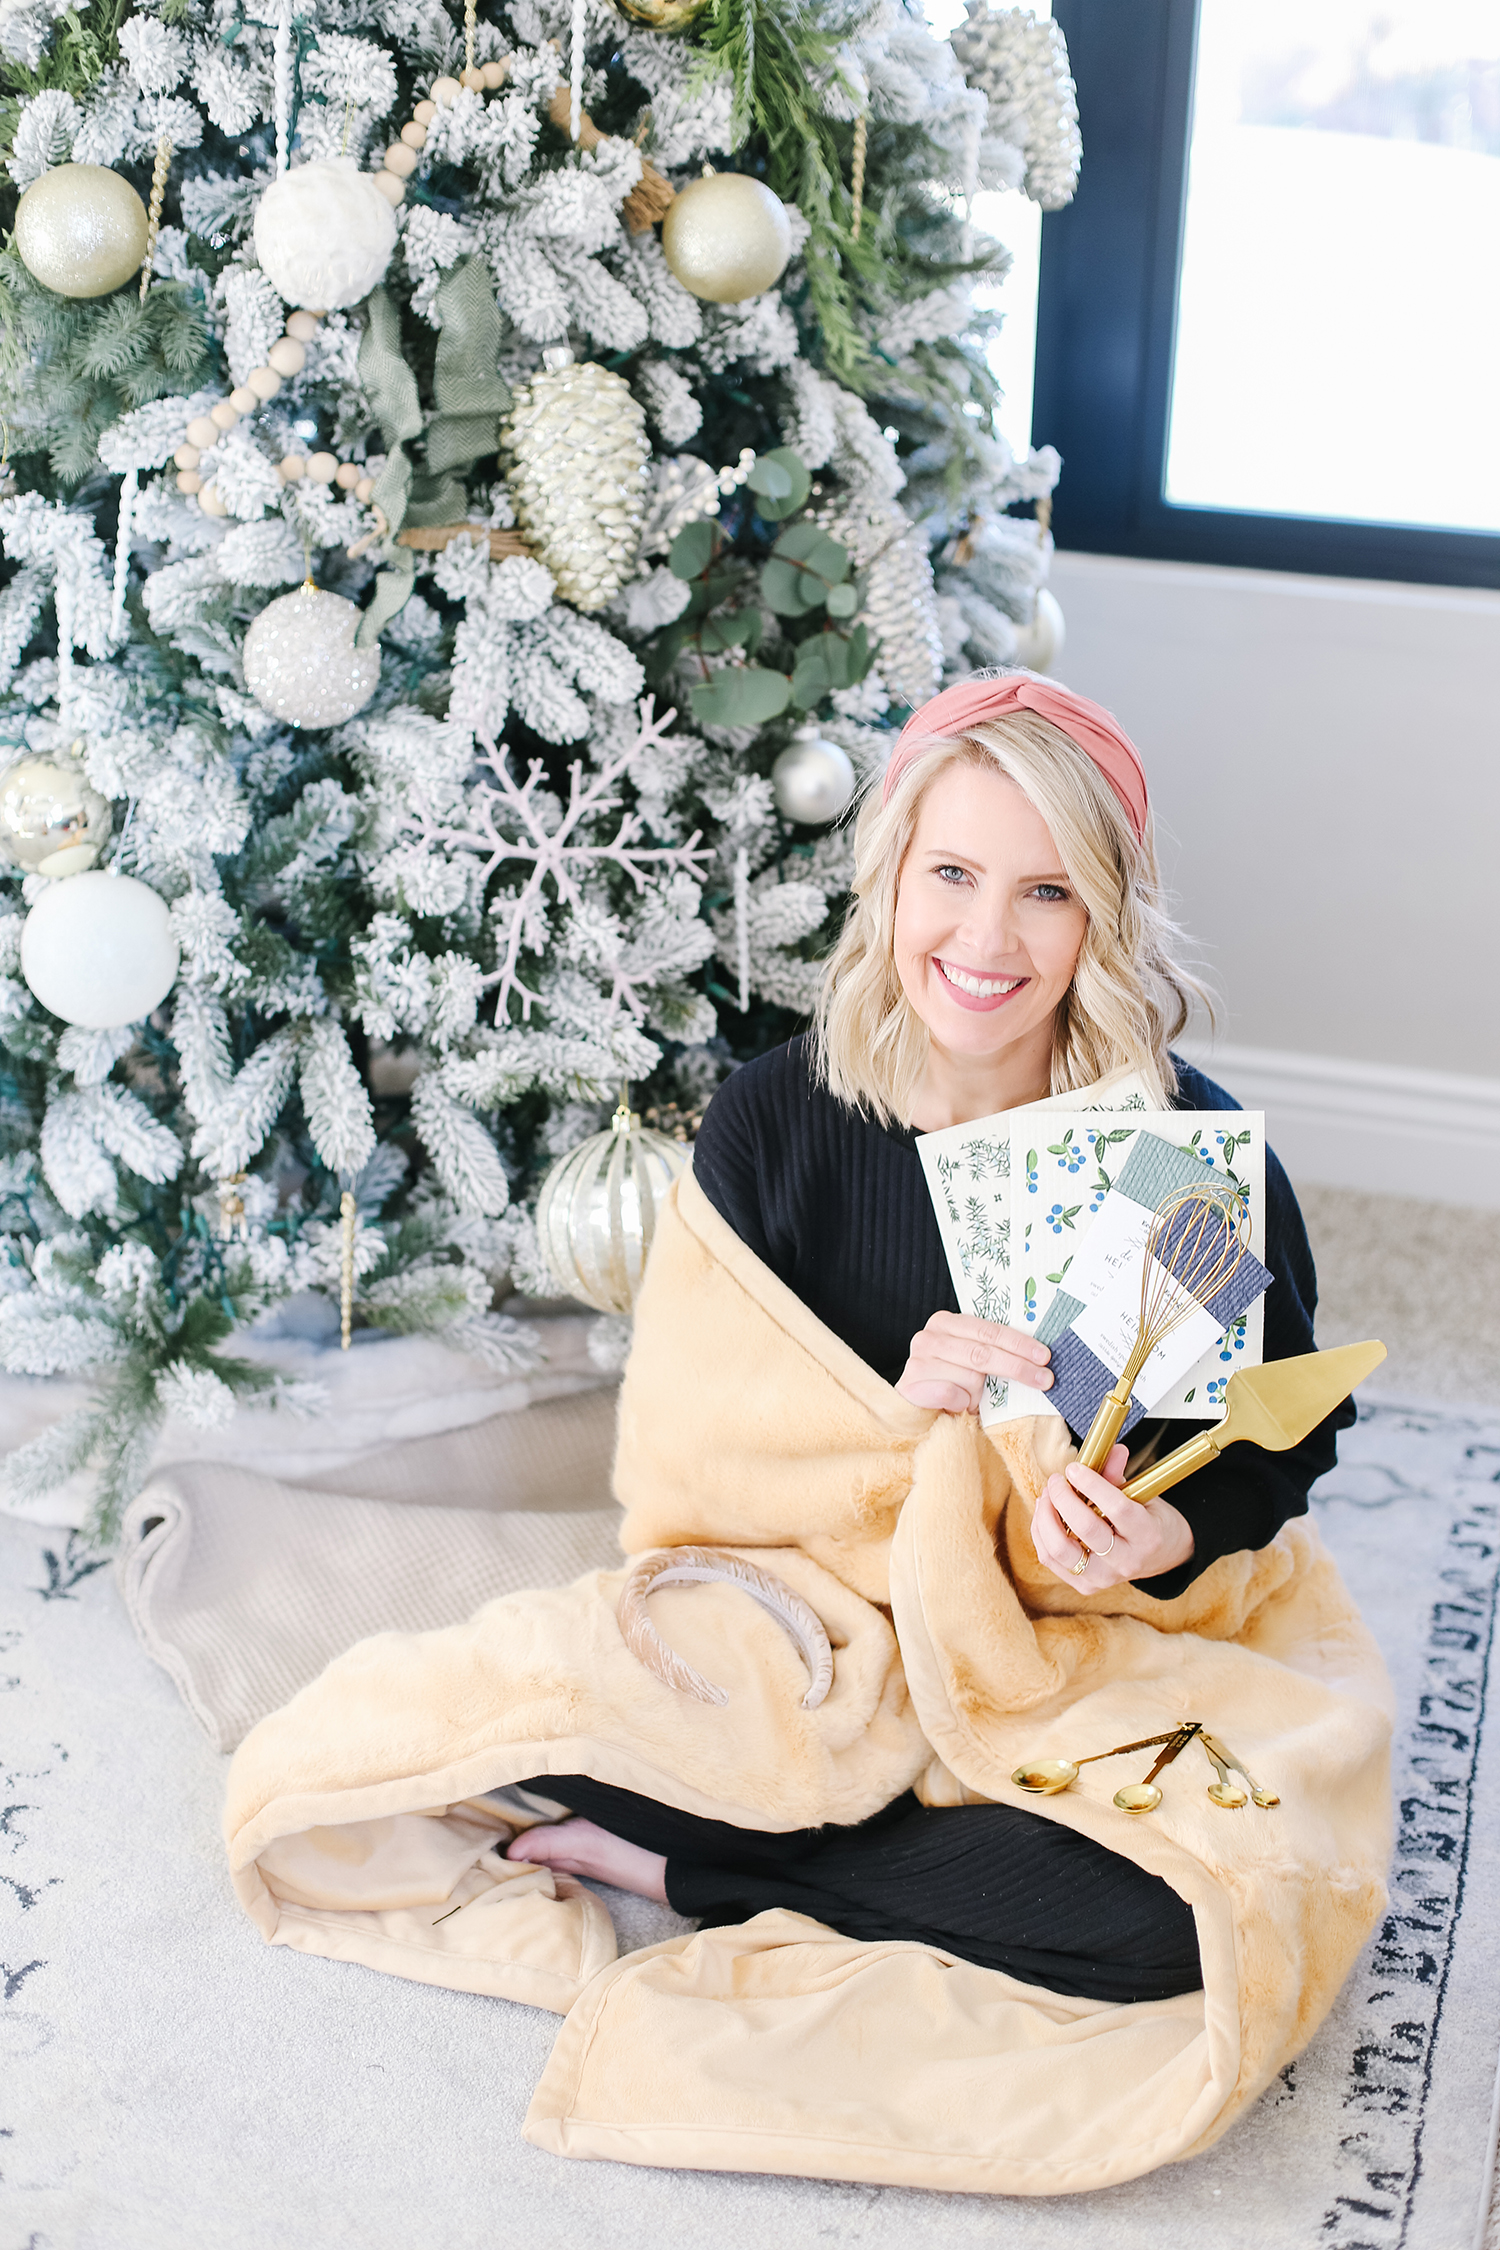 Unique Holiday Gift Ideas for Her featured by Utah lifestyle blogger, By Jen Rose- Such cute home decor gifts for mom, friends, and yourself!